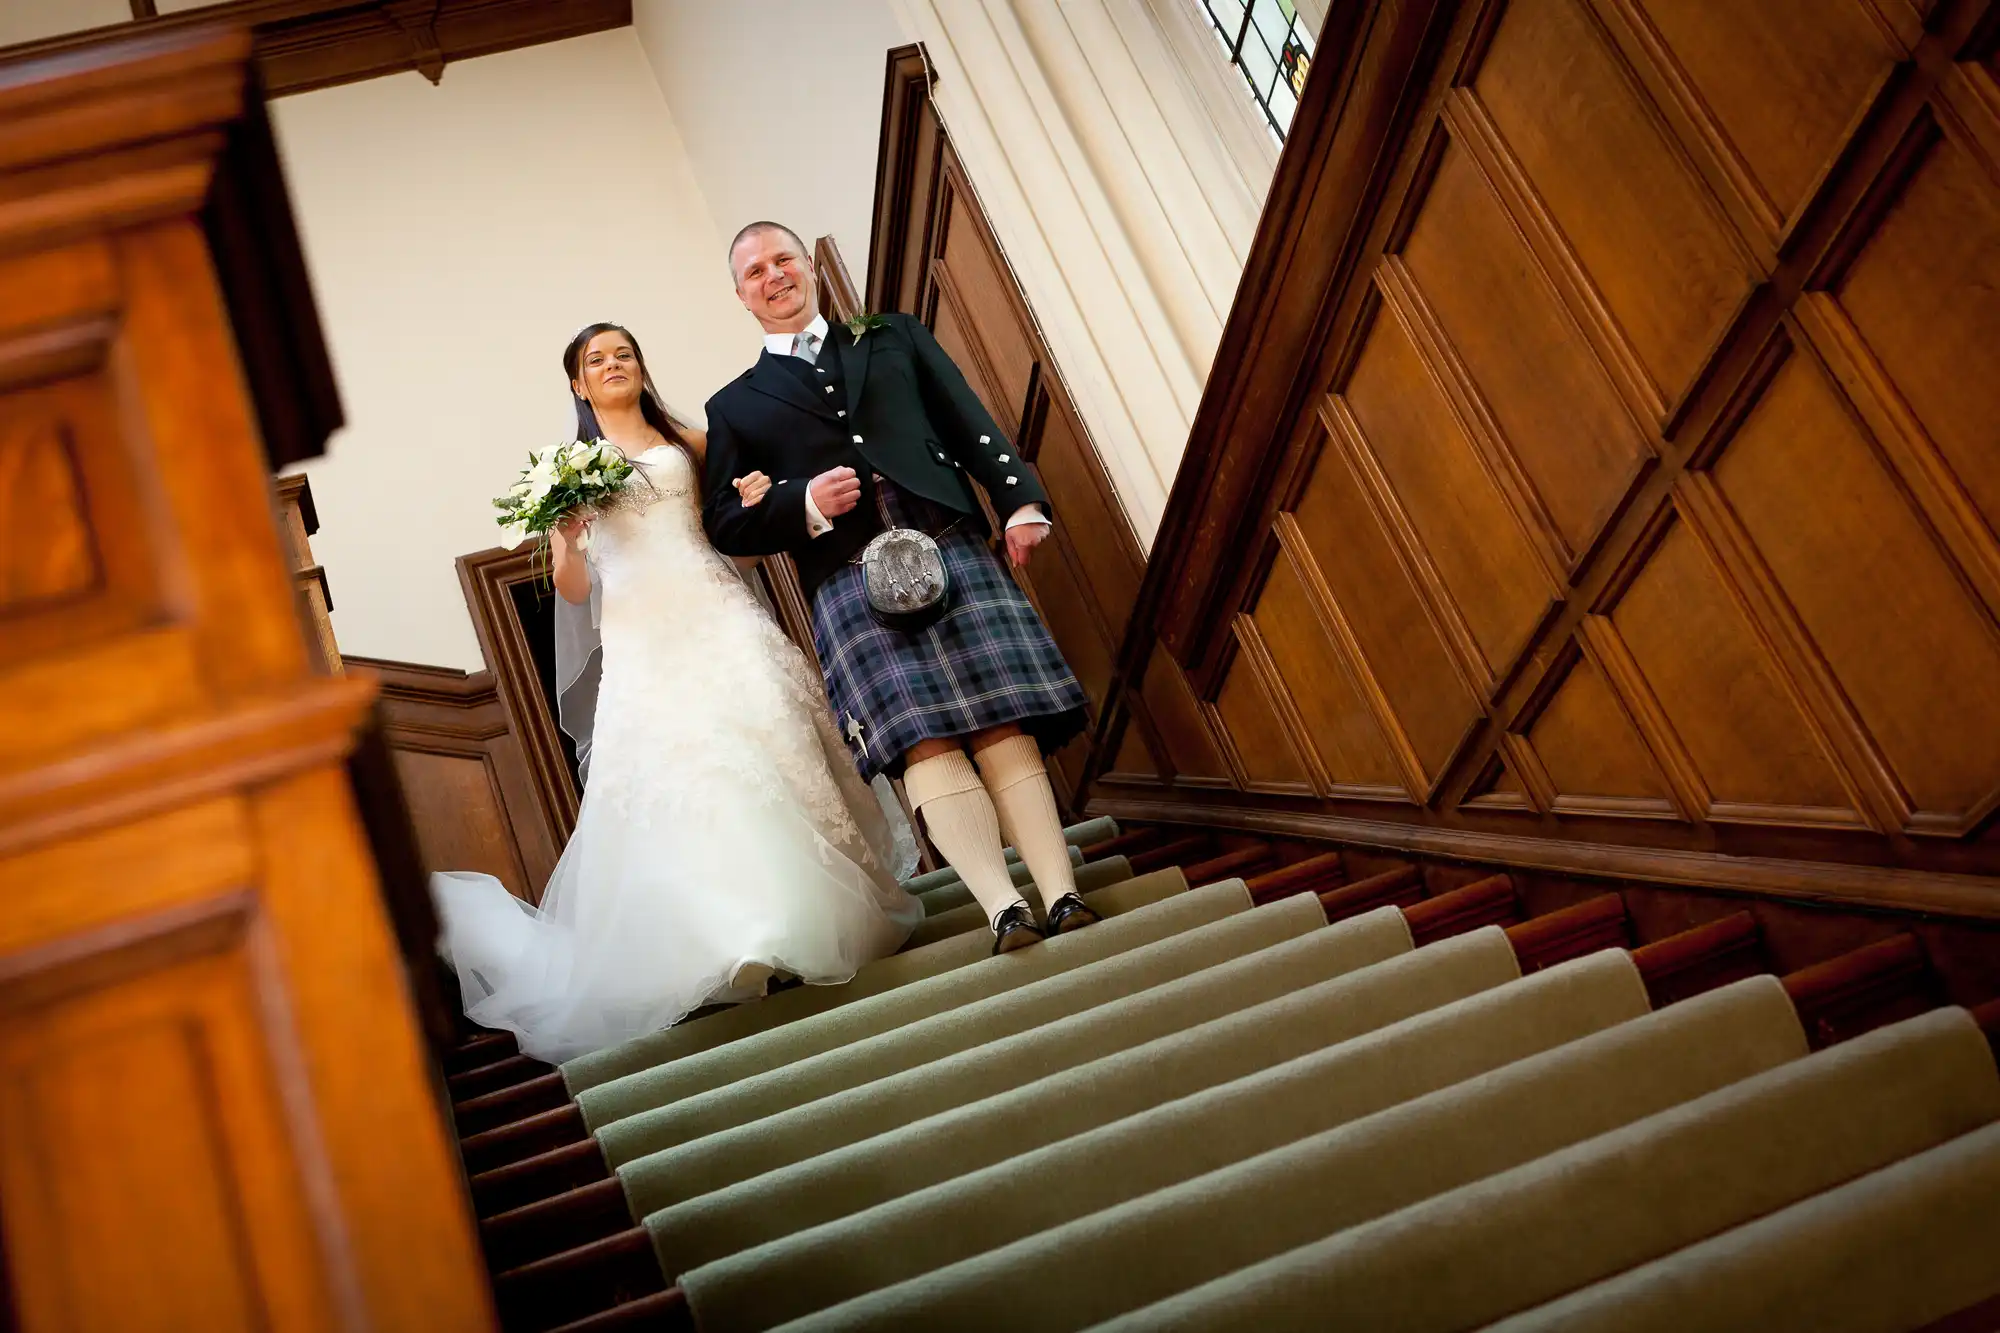 A bride and groom smiling and holding hands as they walk down the stairs of a church, the groom wearing a kilt.